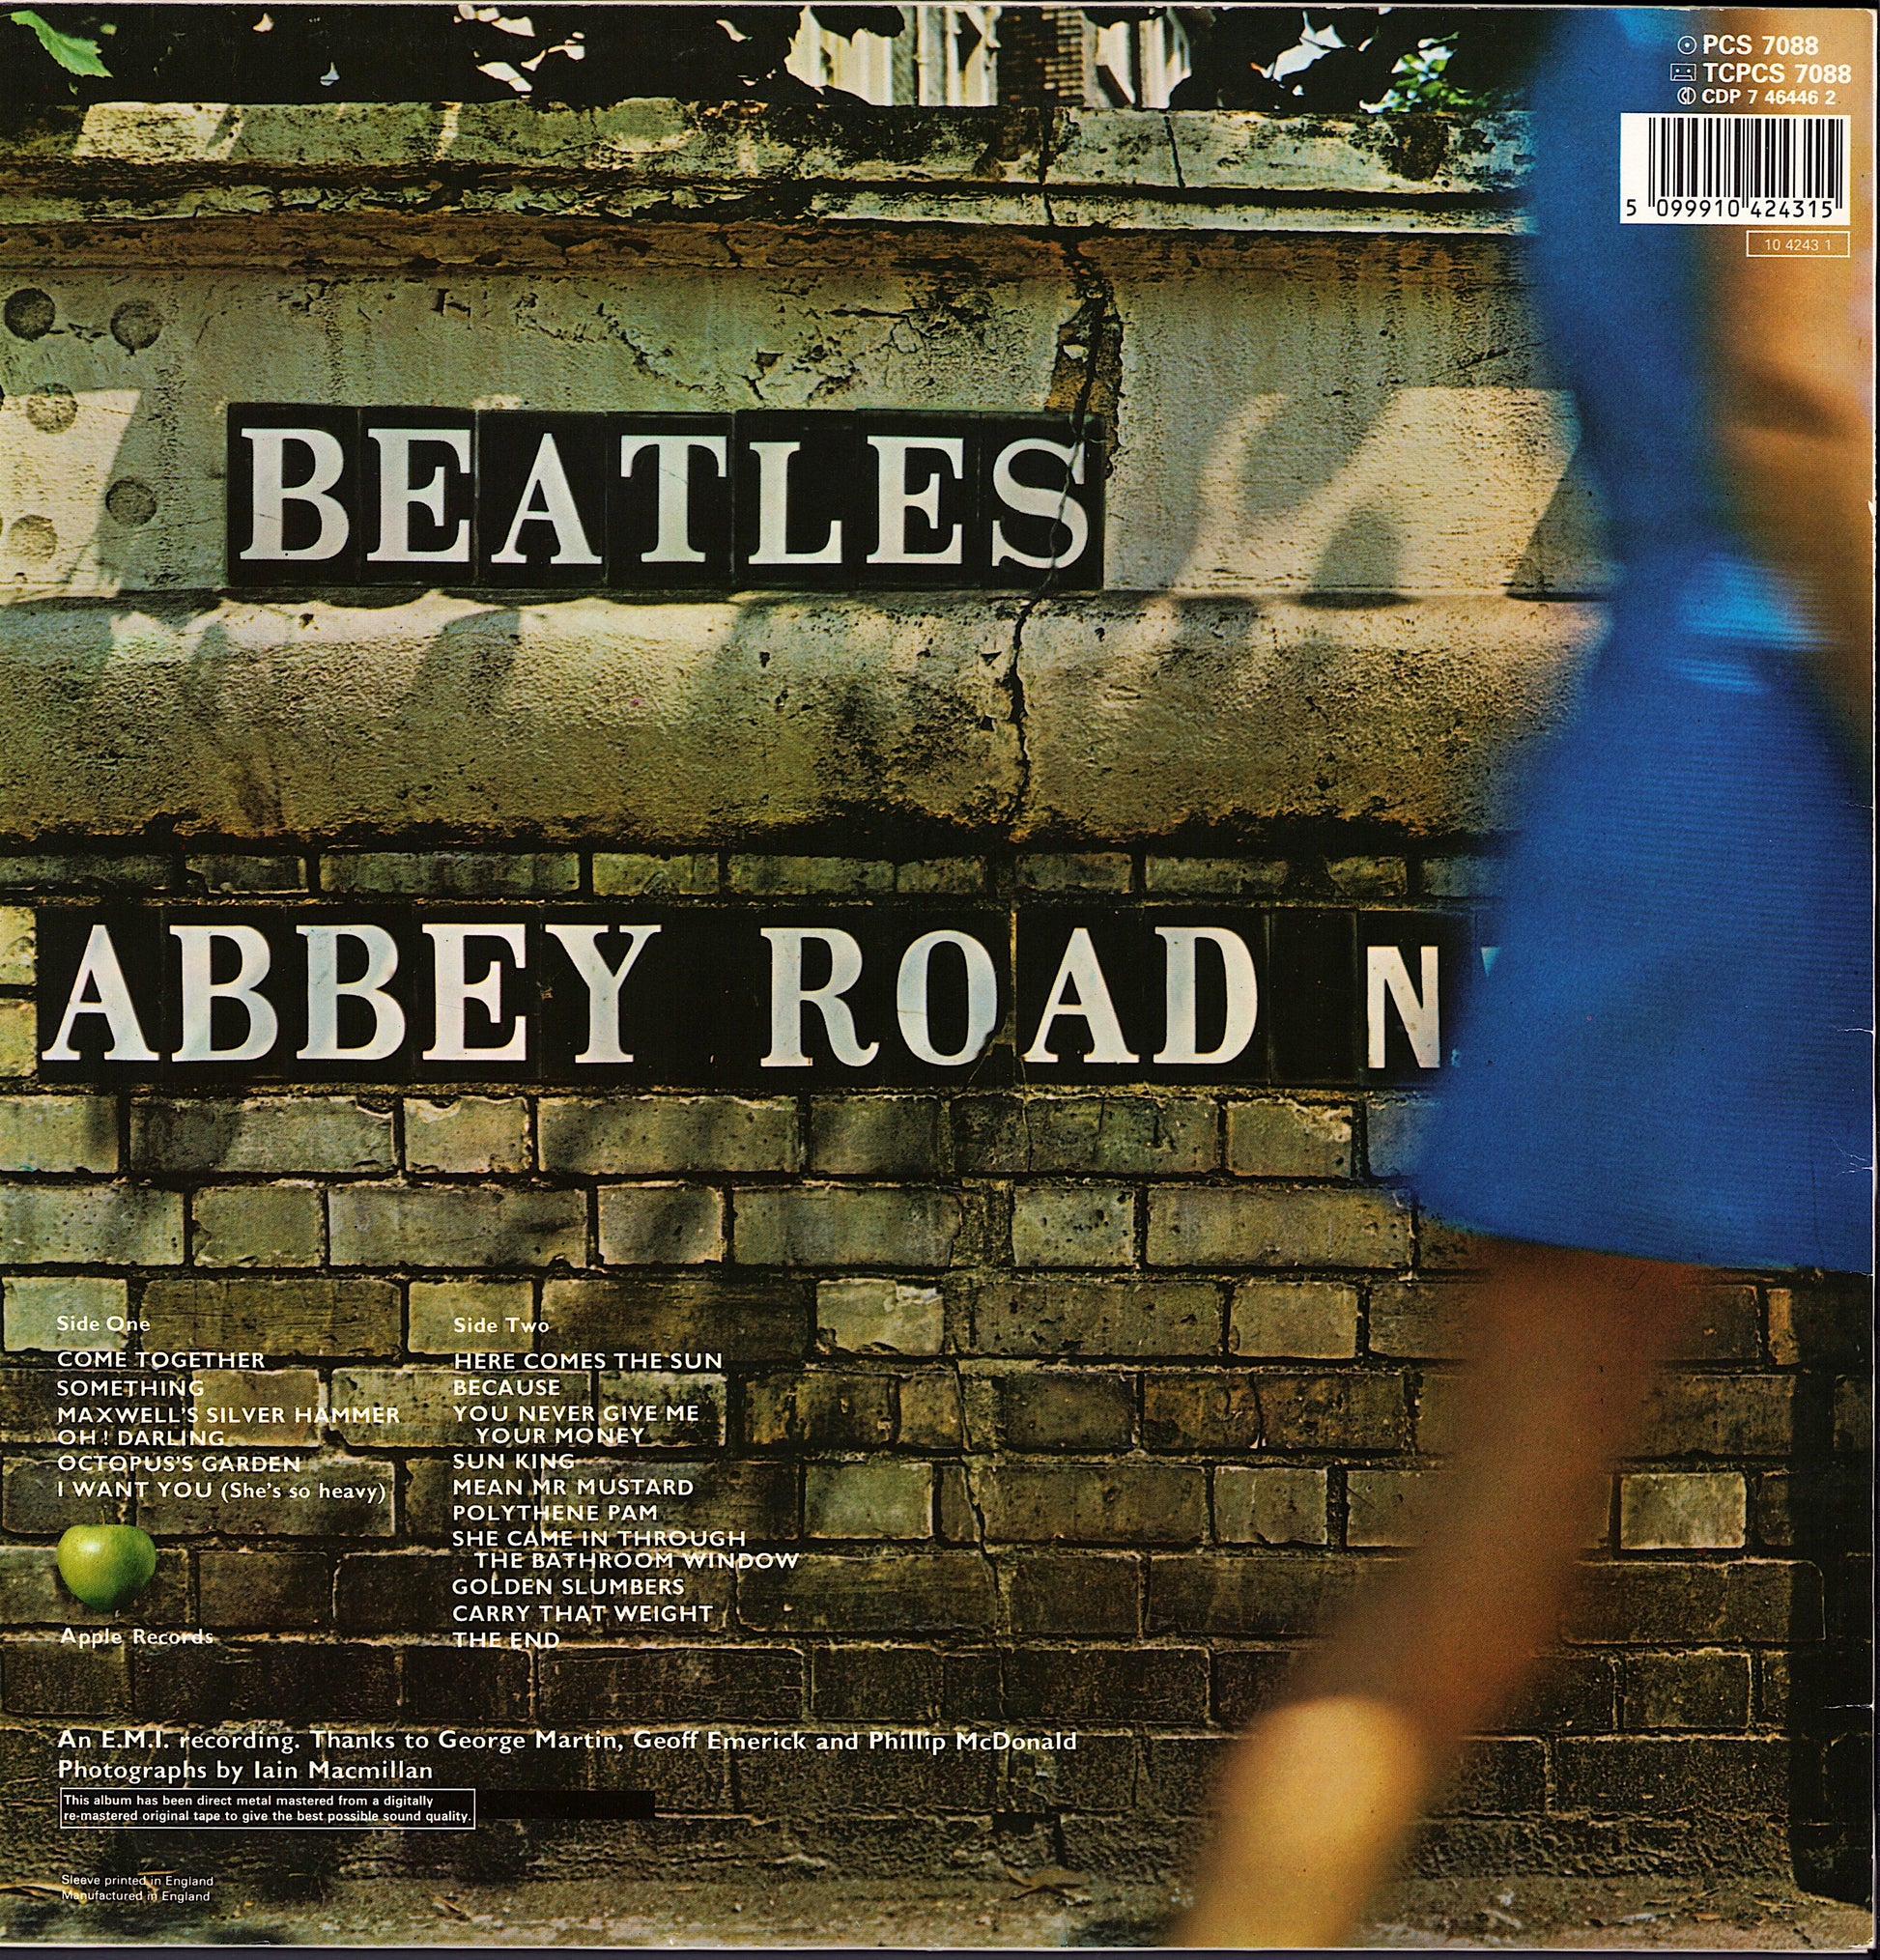 The Beatles ‎- Abbey Road